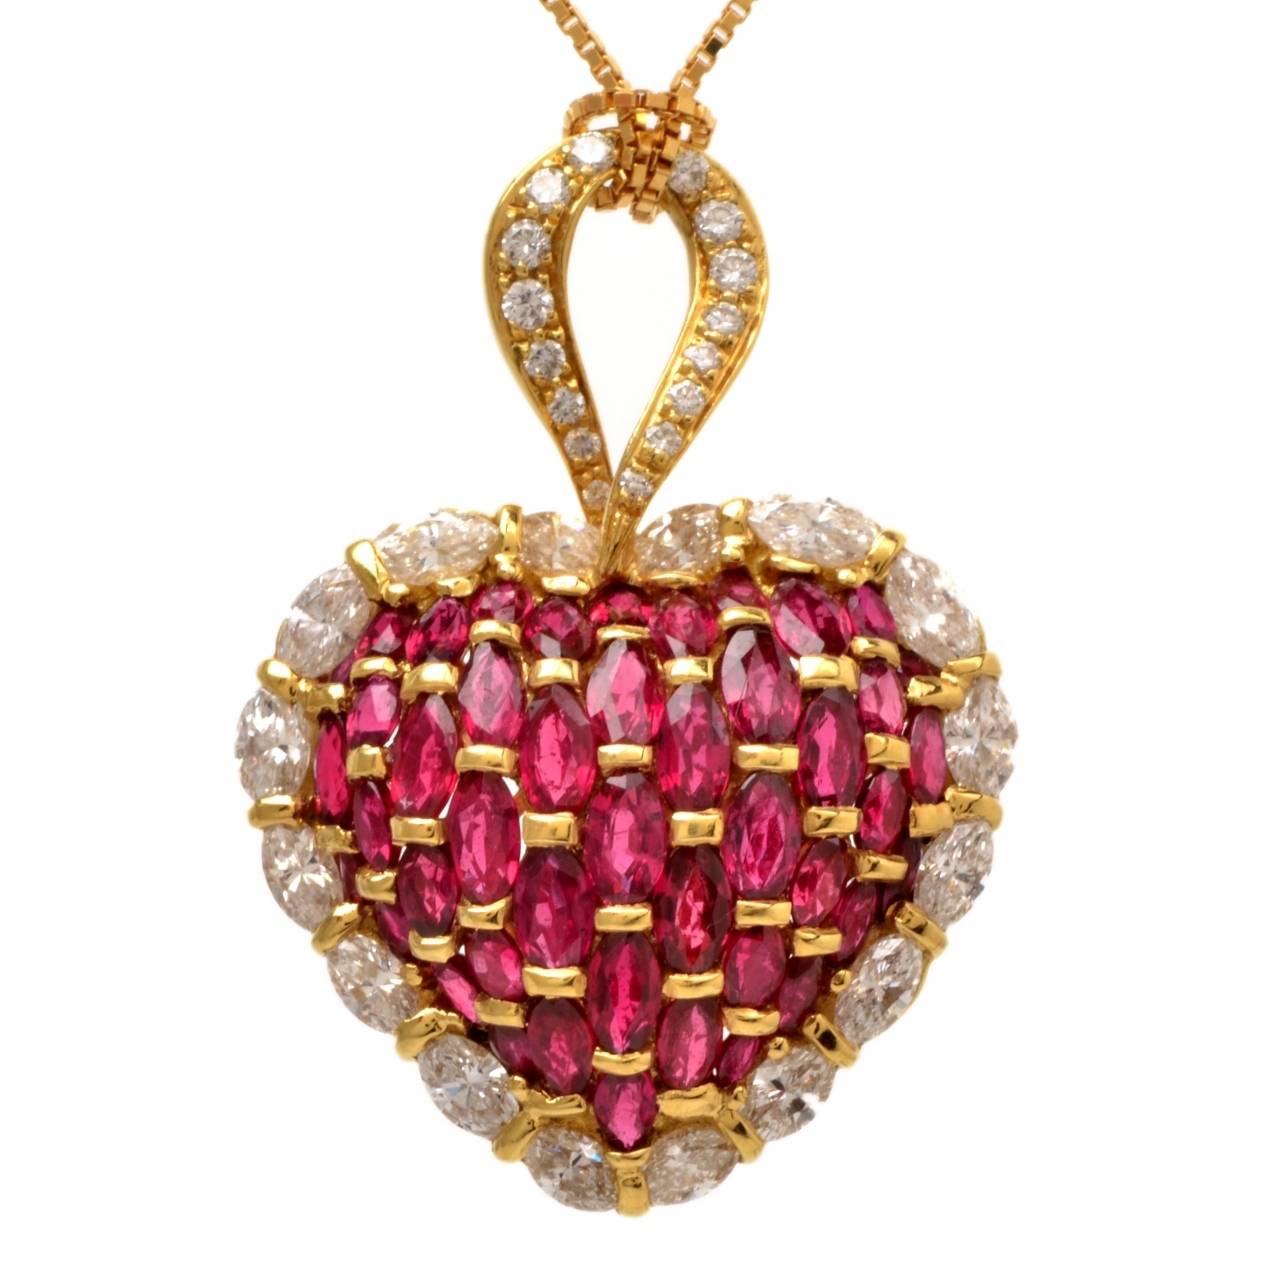 This high quality ruby diamond pendant is crafted in solid 18K yellow gold. Centered with a total of 46 marquise and round cut red rubies approx. 12.25ct, surrounded by 17 genuine marquise cut diamonds approx. 4.50ct, H-I color, VS clarity. Its bale